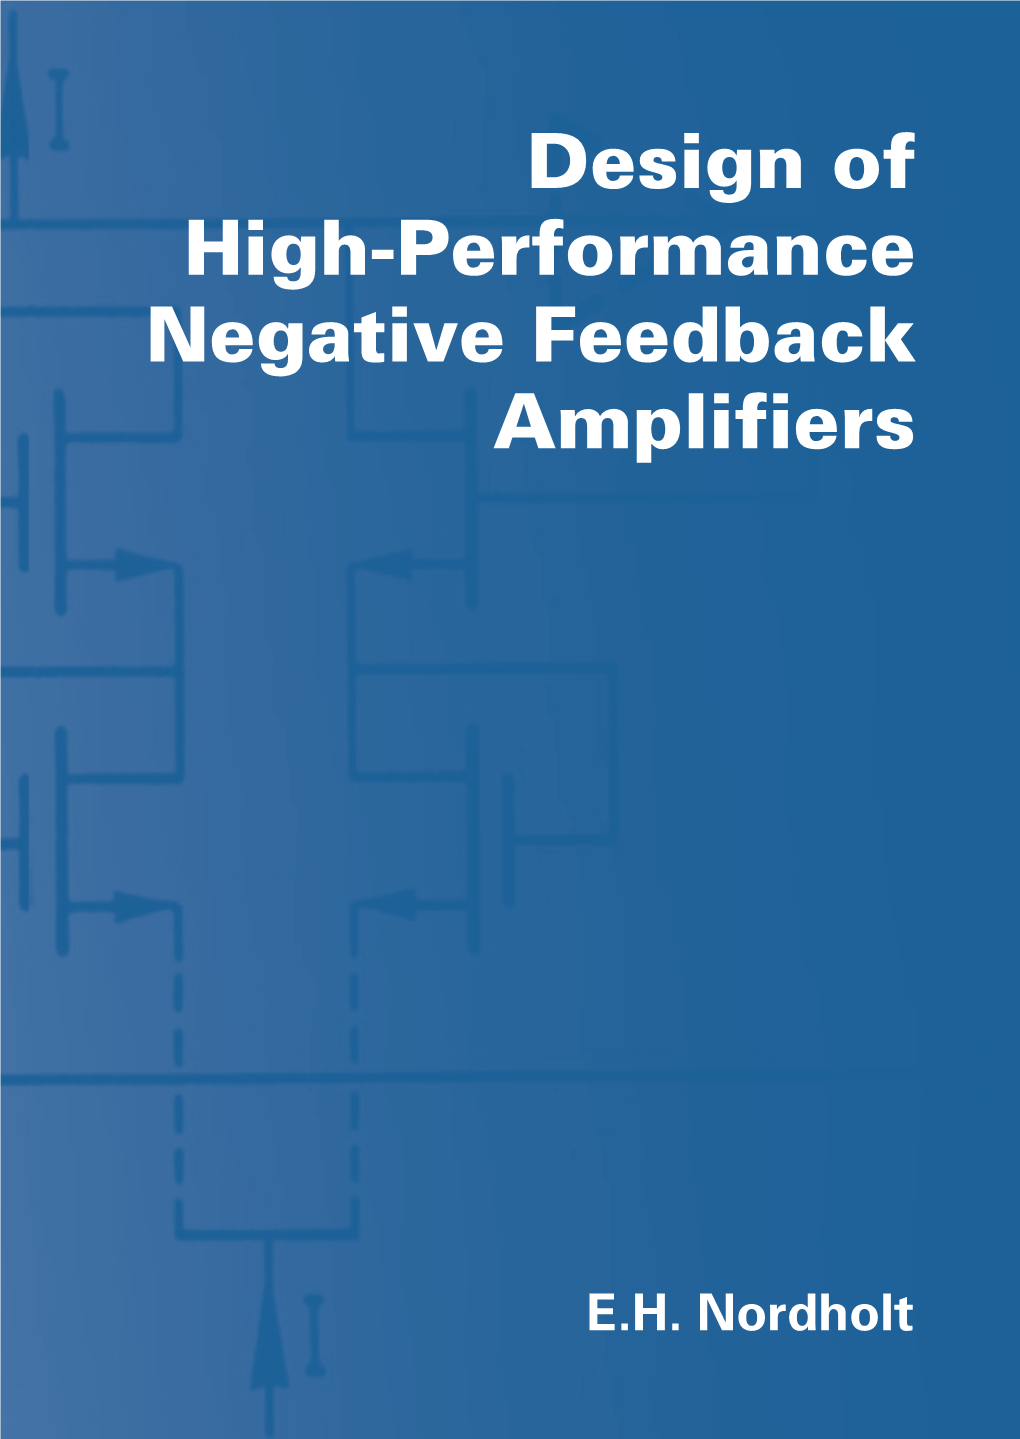 Design of High-Performance Negative Feedback Amplifiers E.H